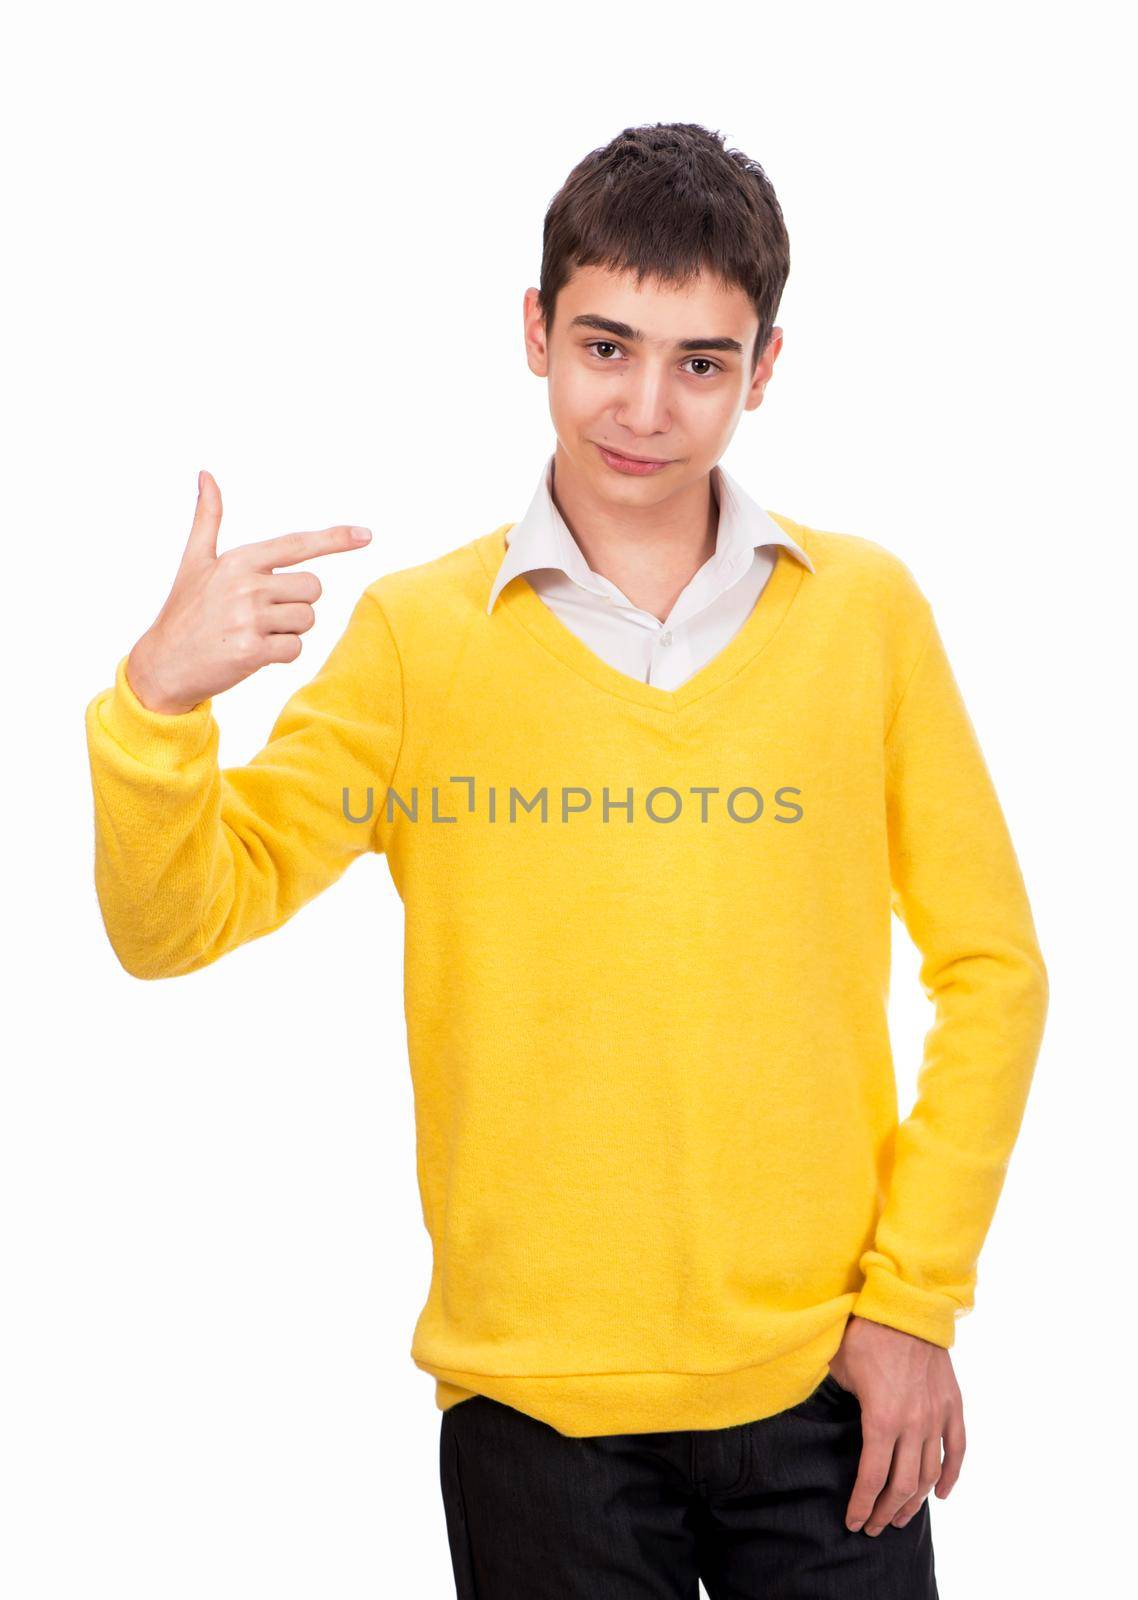 Pick me. schoolboy in yellow sweater points at himself with hand isolated on white background by aprilphoto